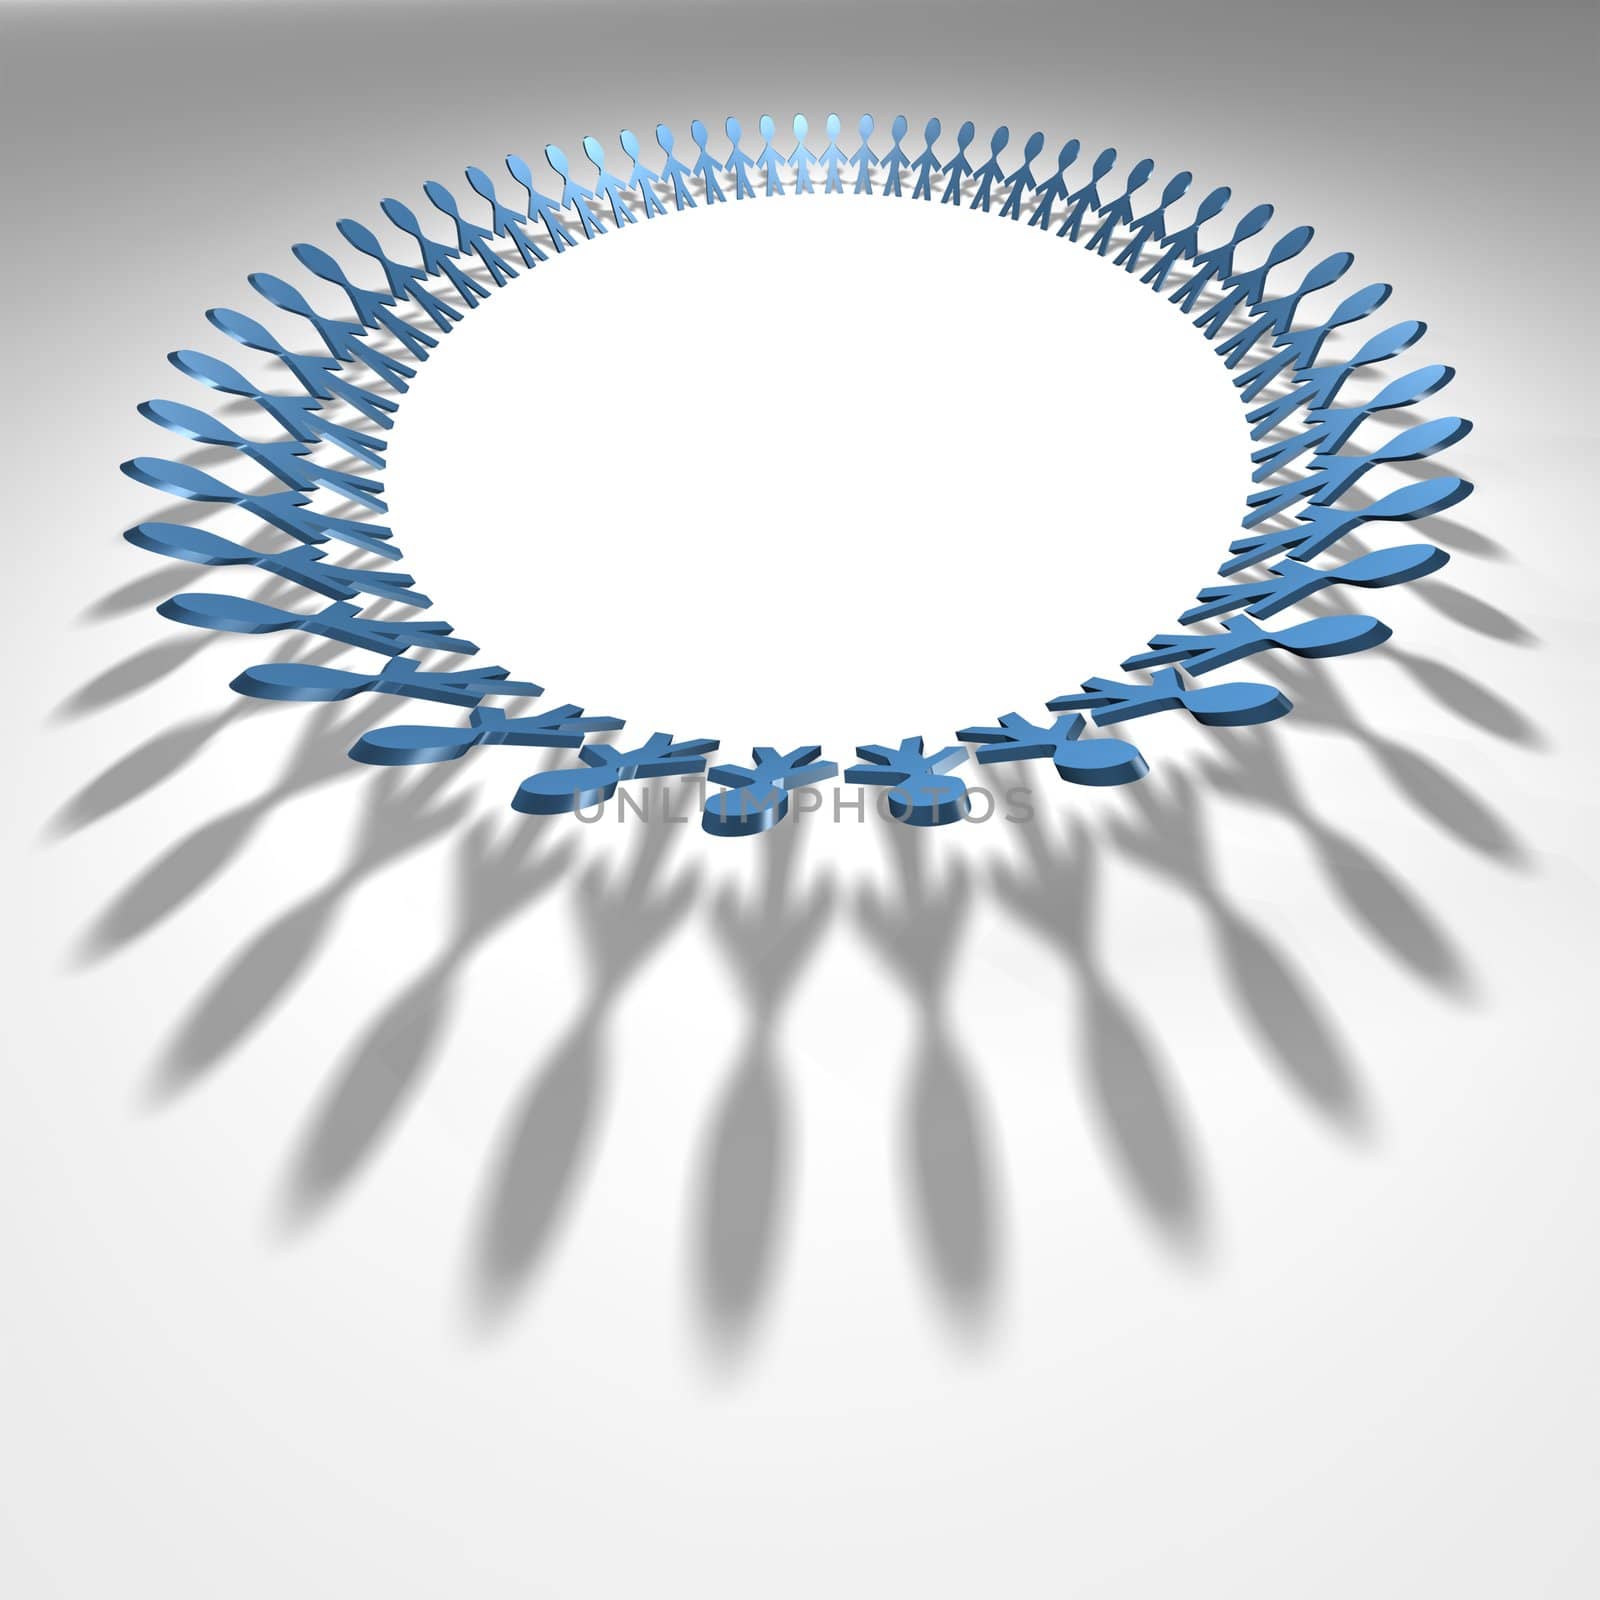 Blue 3D people in a circle shape